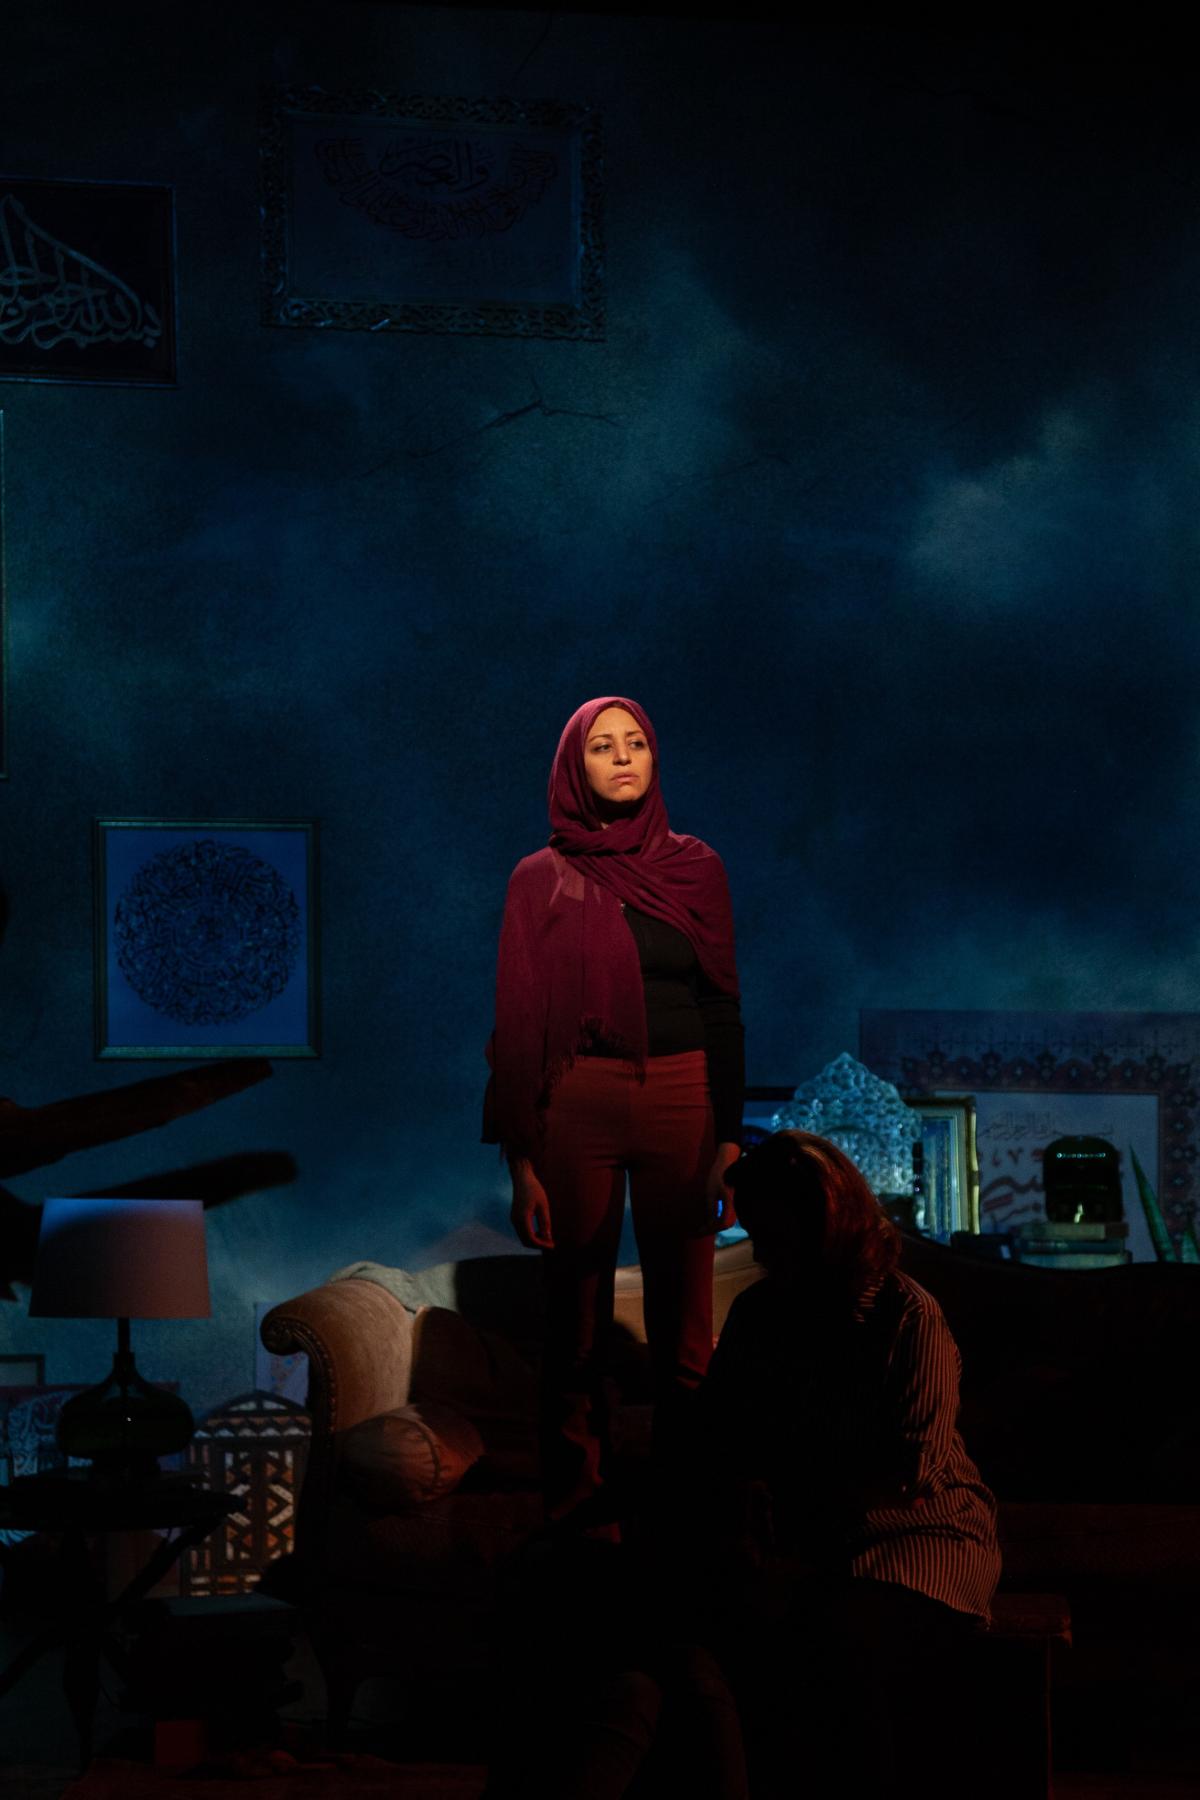 Woman in a hijab under stage lighting, looking out and up into the distance.